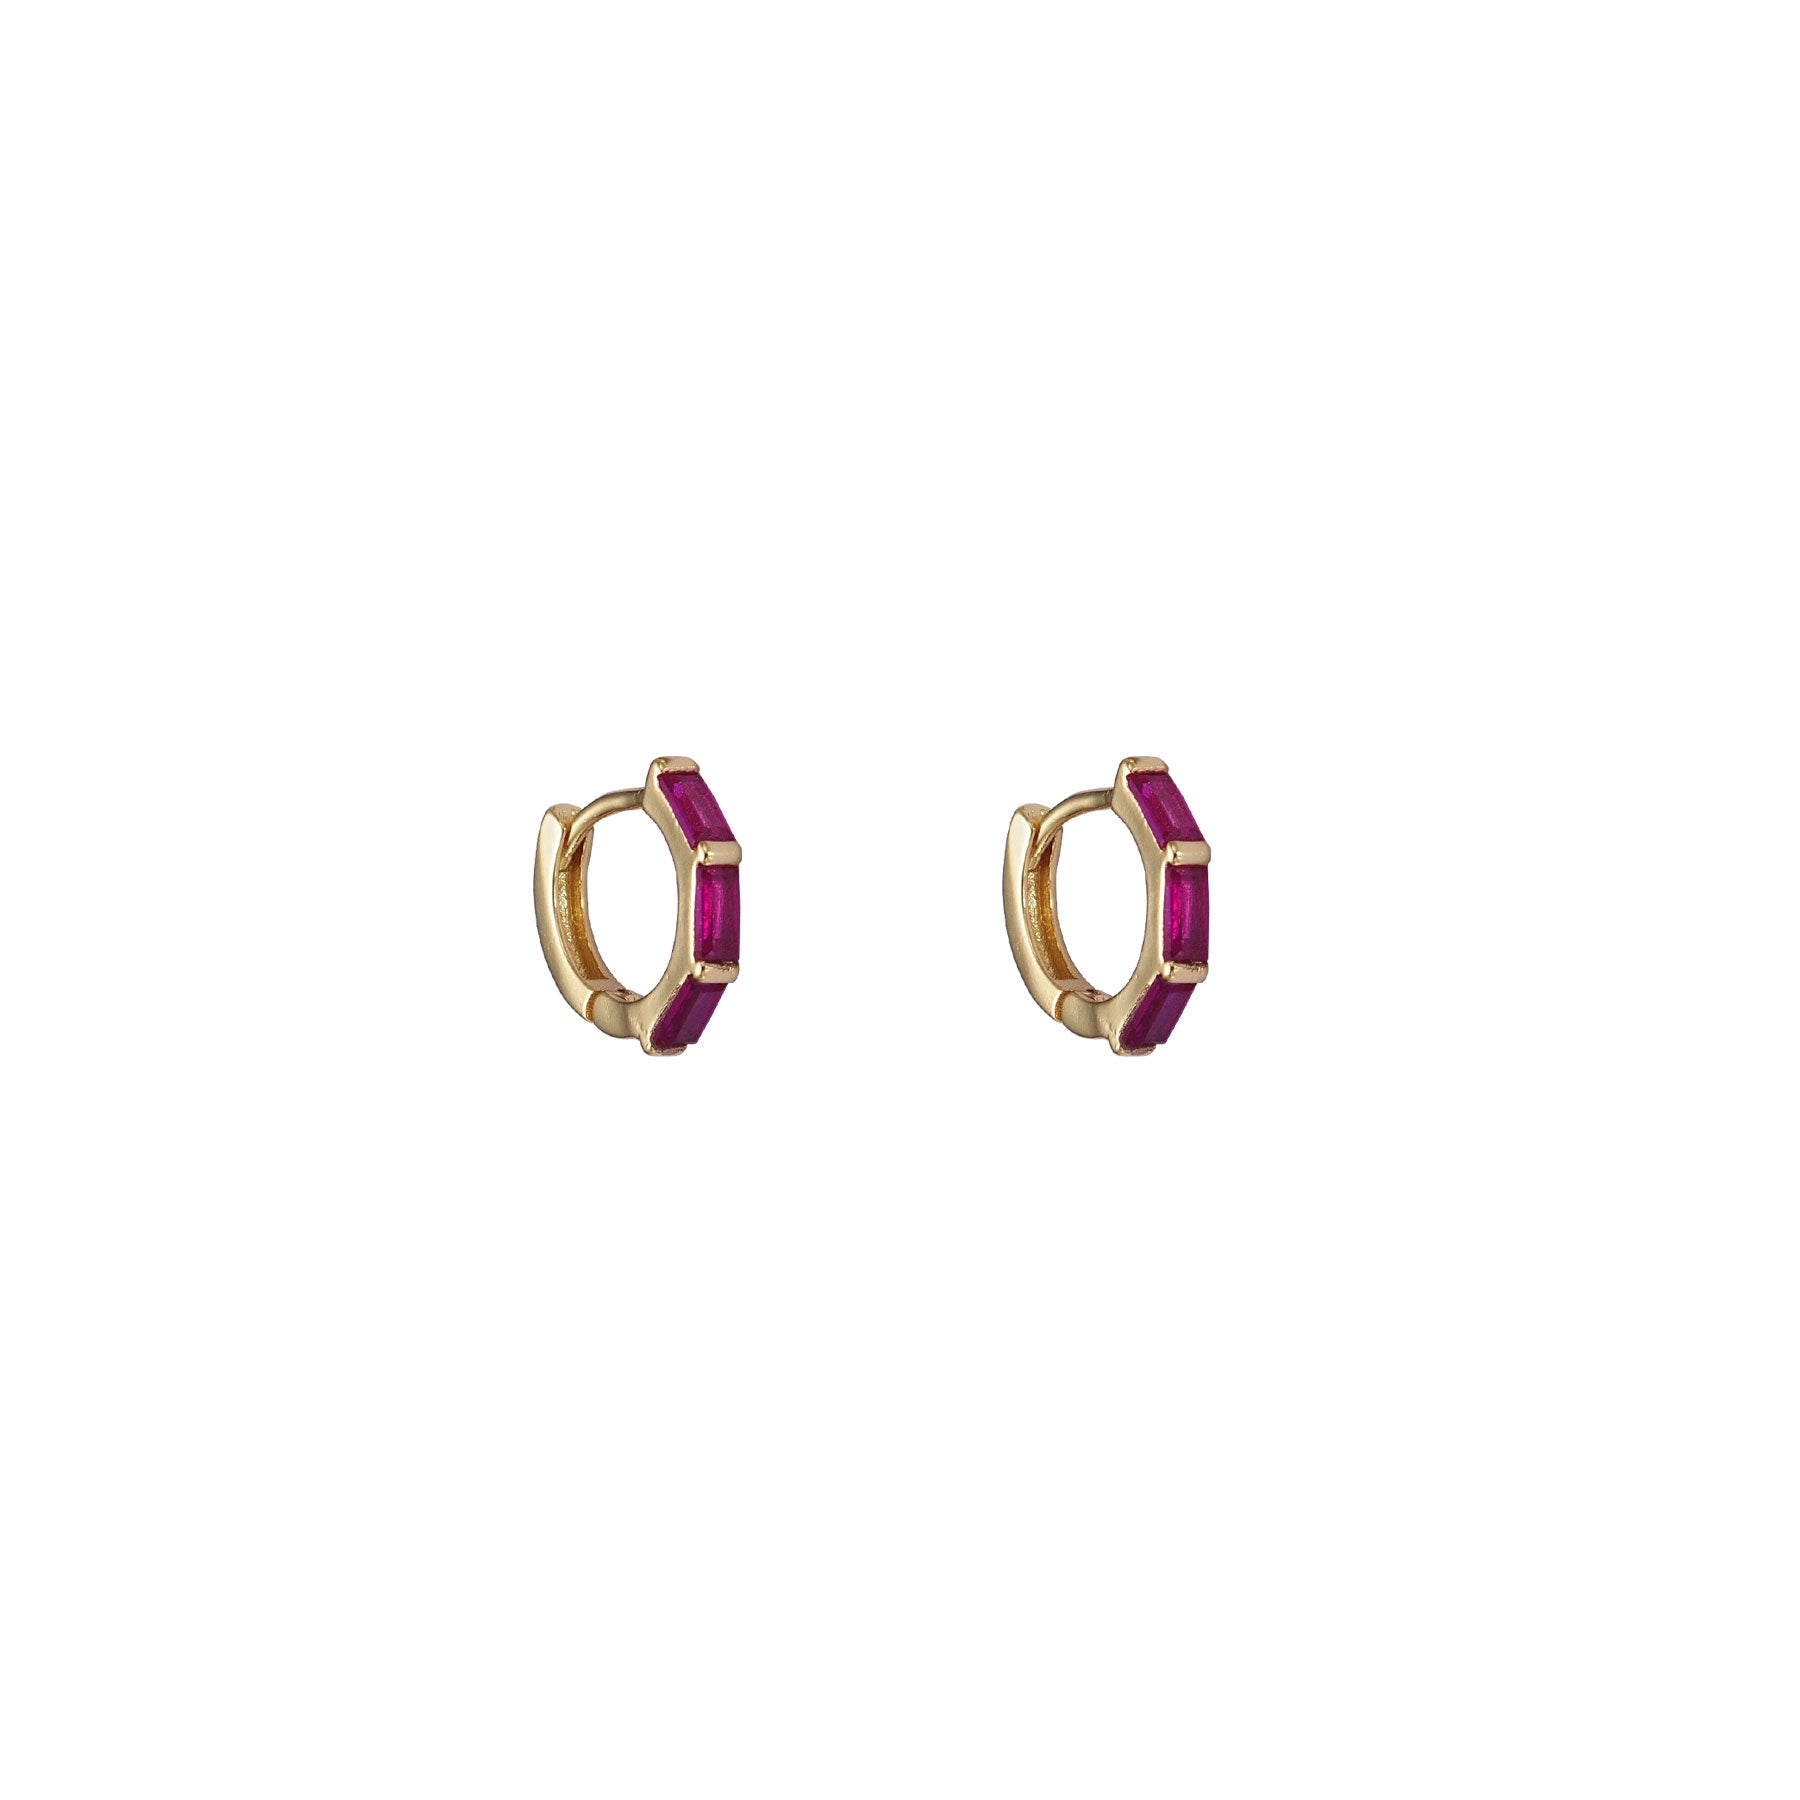 Gold and red stones hoops